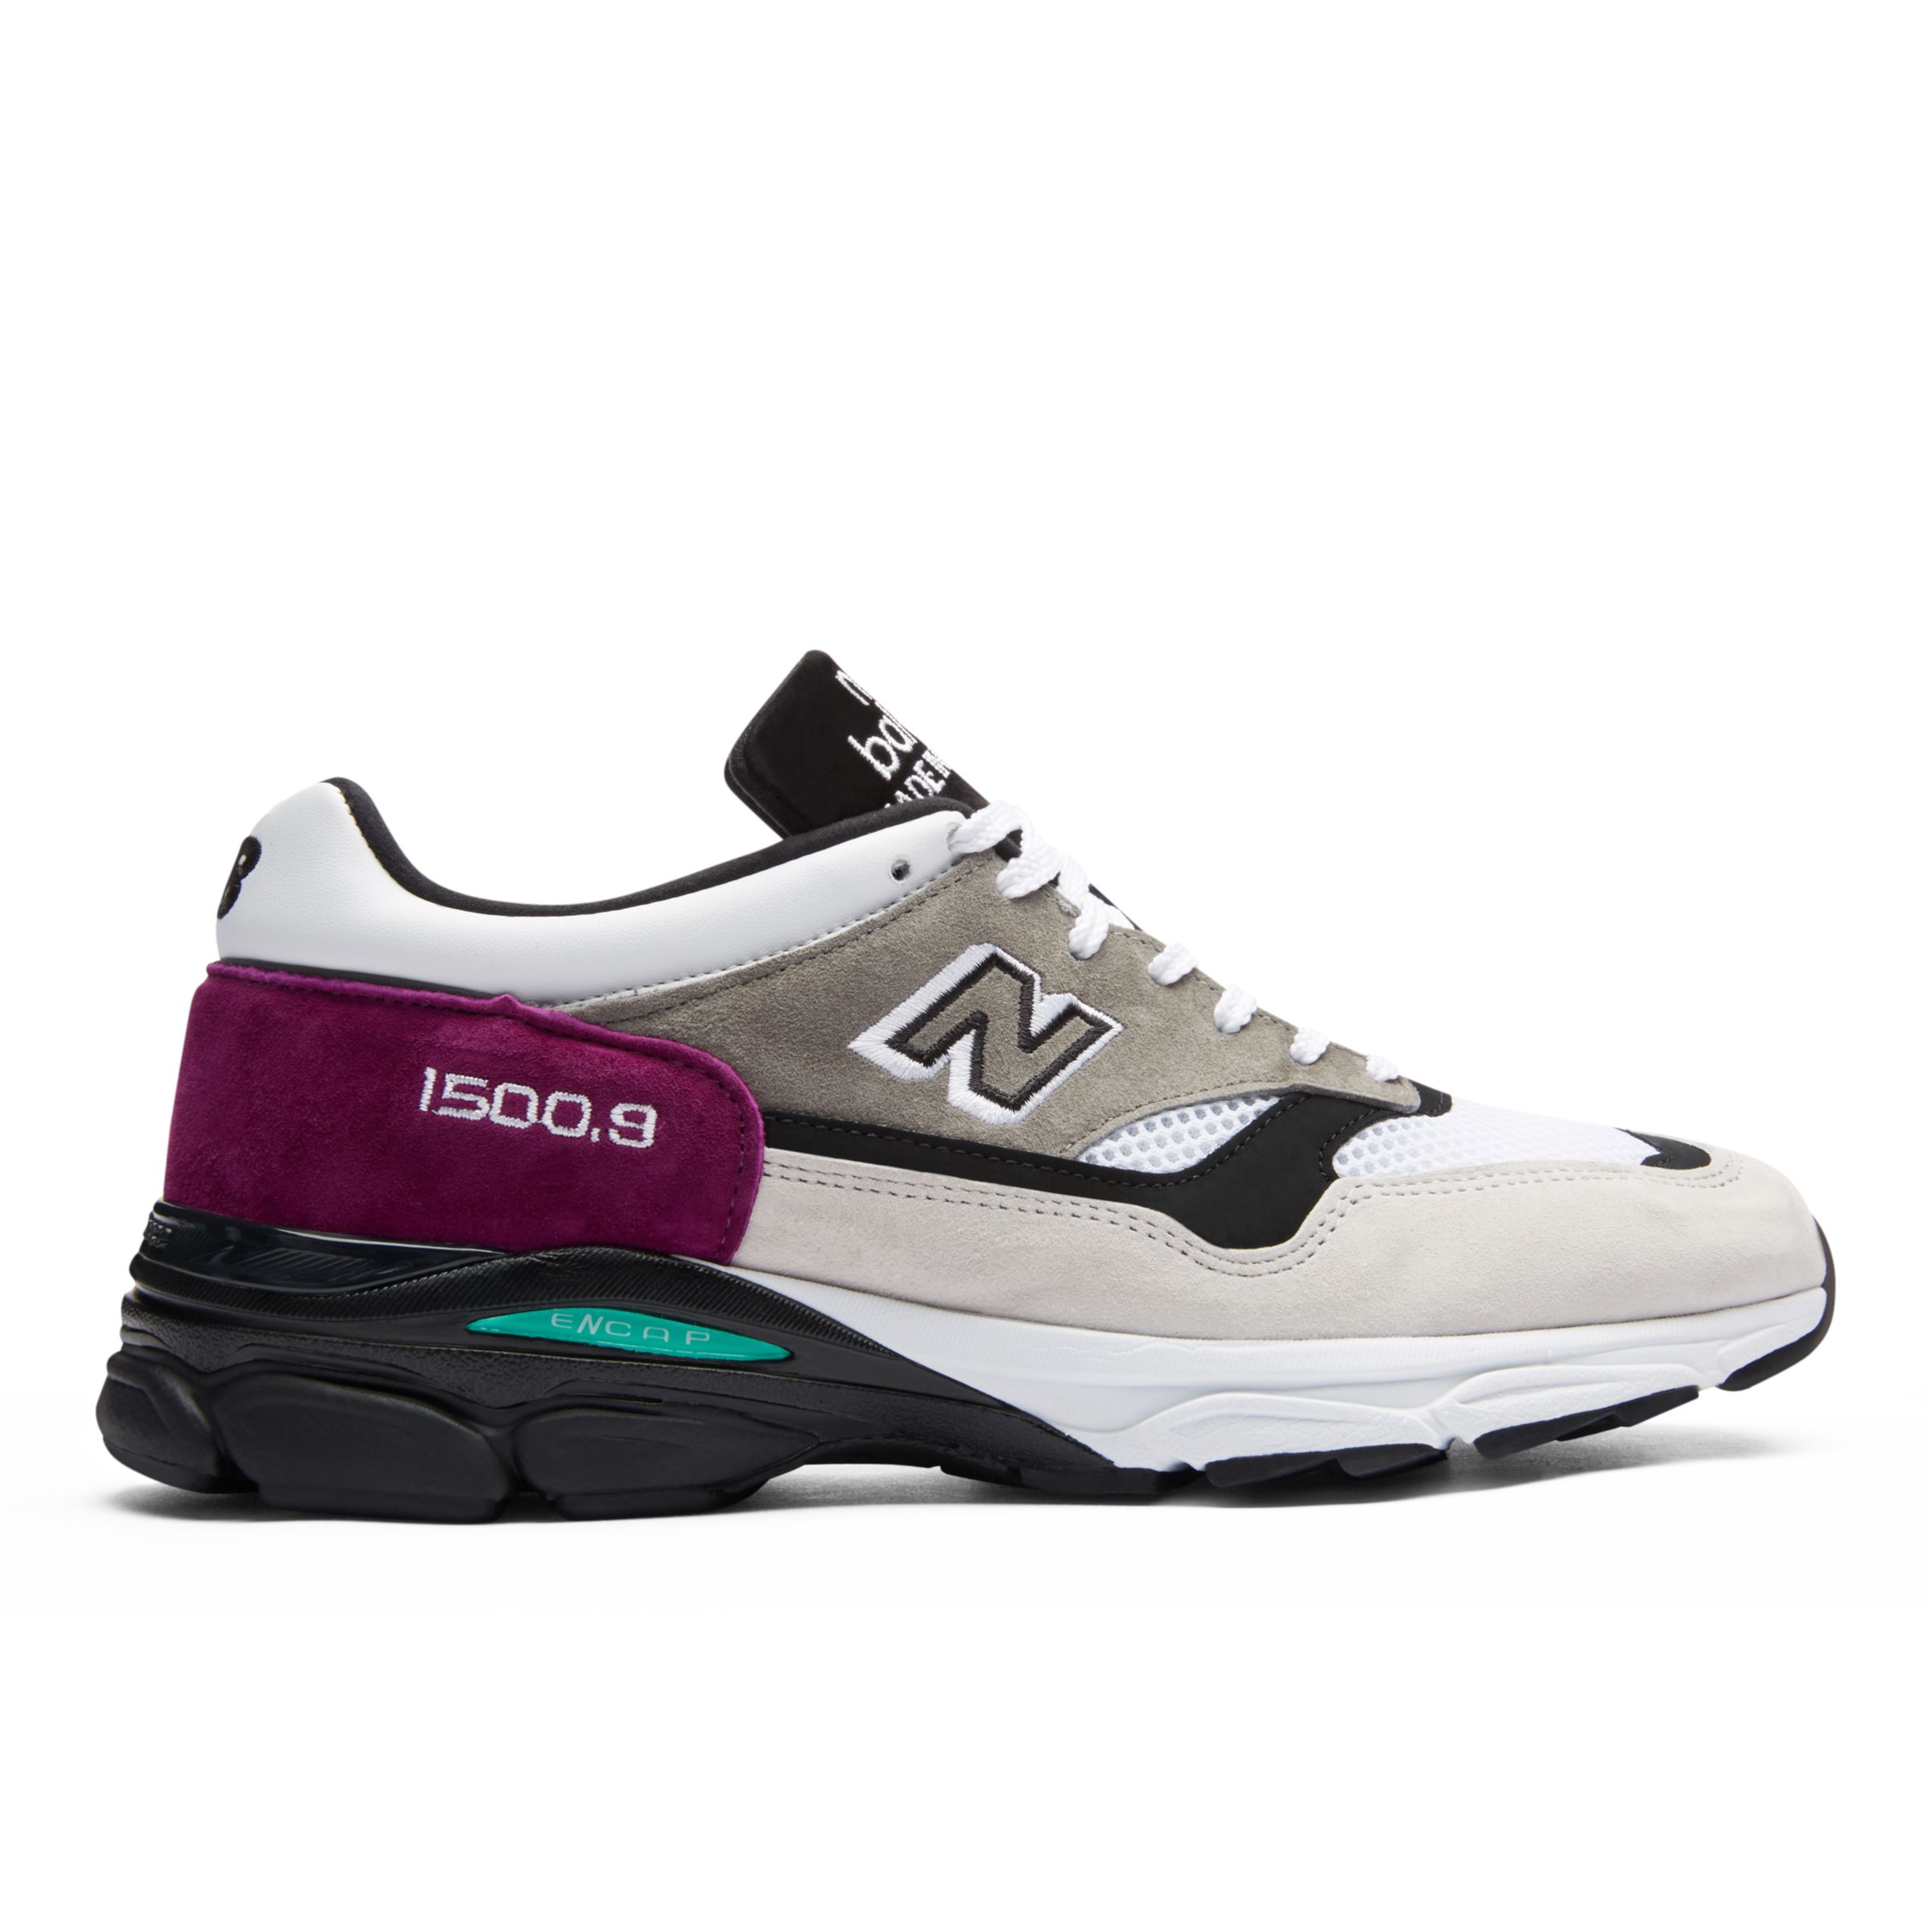 new balance 1500.9 made in england